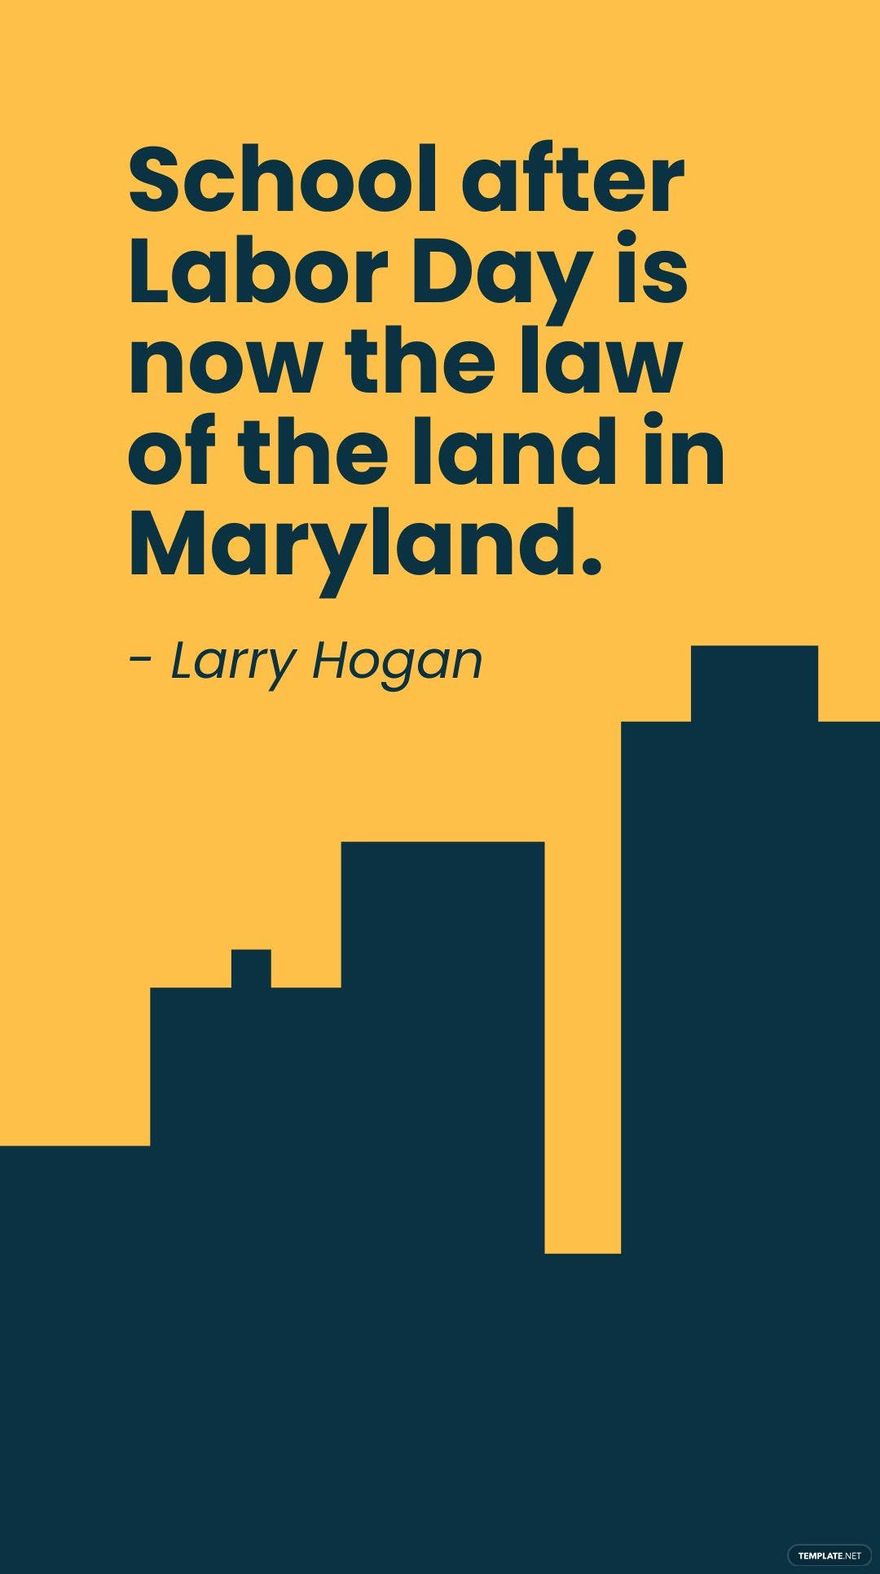 Larry Hogan - School after Labor Day is now the law of the land in Maryland.